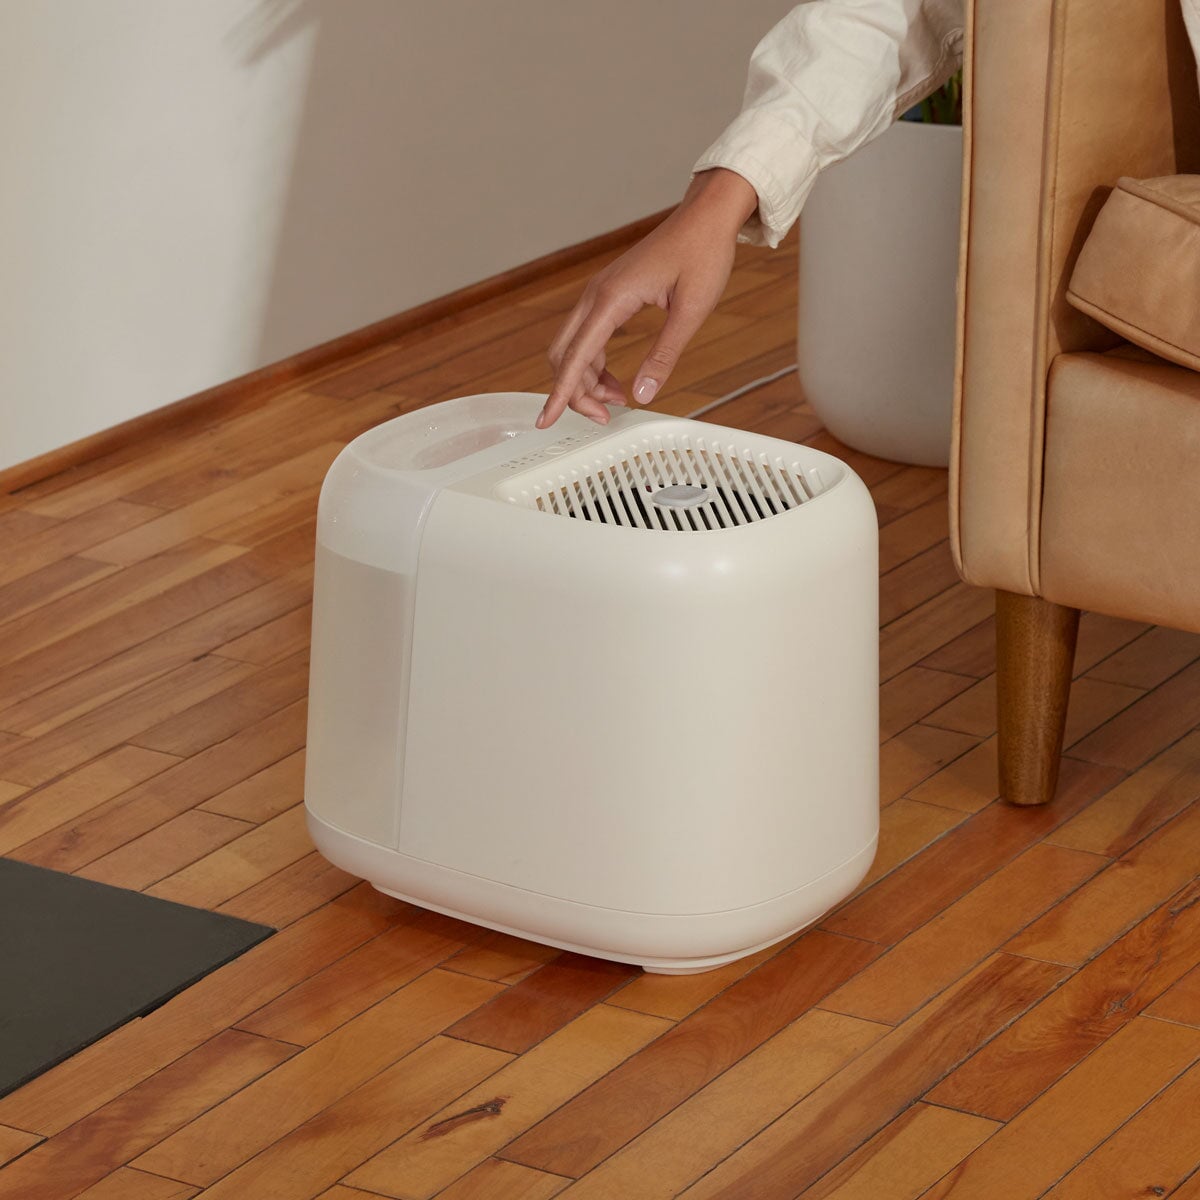 Large Room Humidifier | Lifestyle, Woman reaching for device placed on the ground